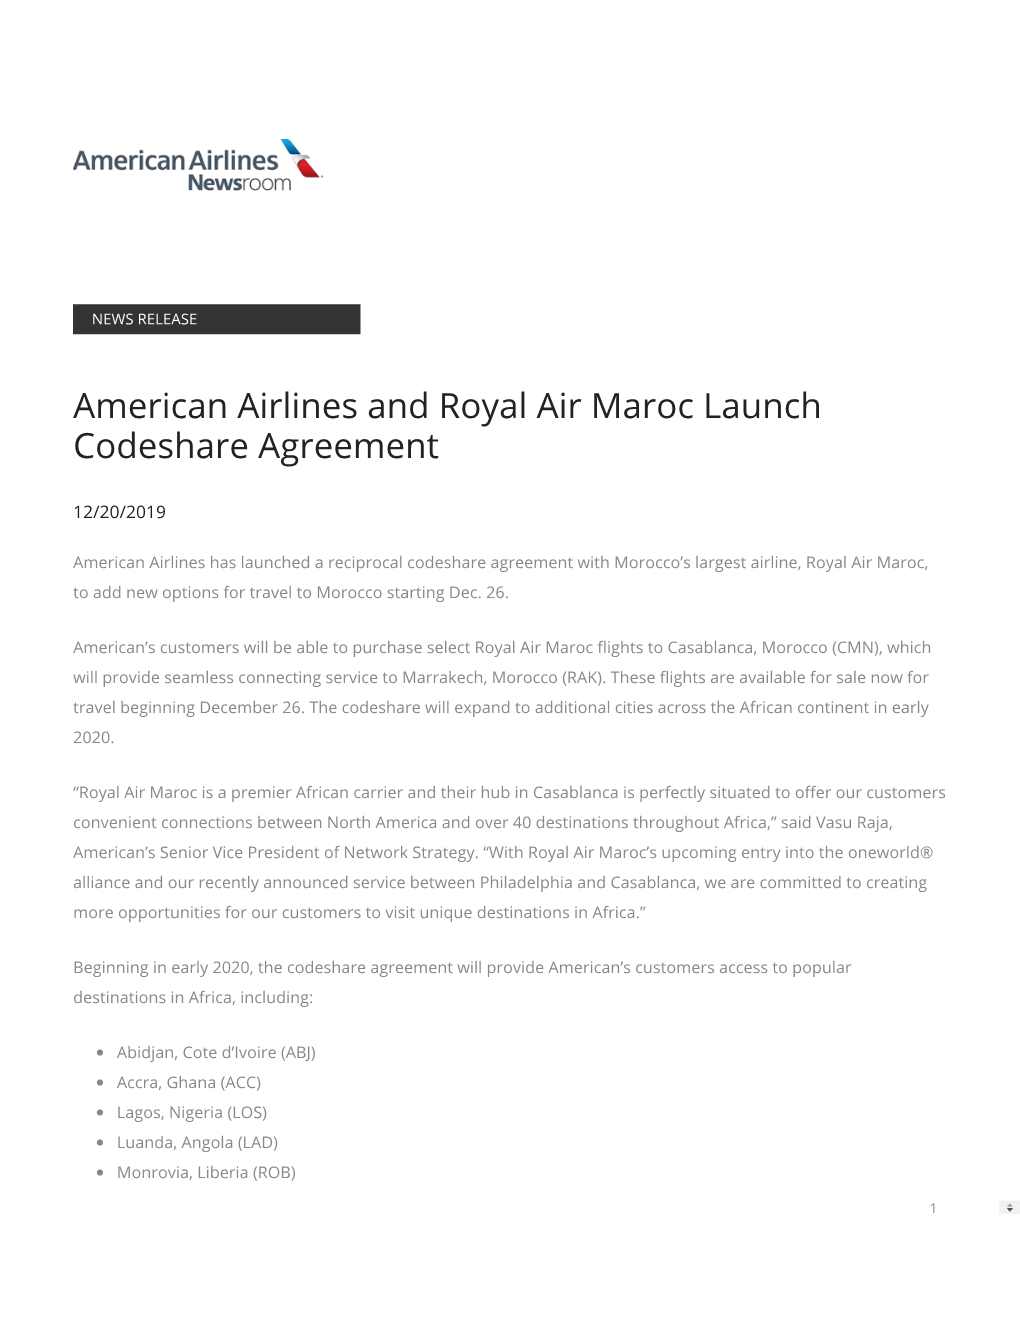 American Airlines and Royal Air Maroc Launch Codeshare Agreement